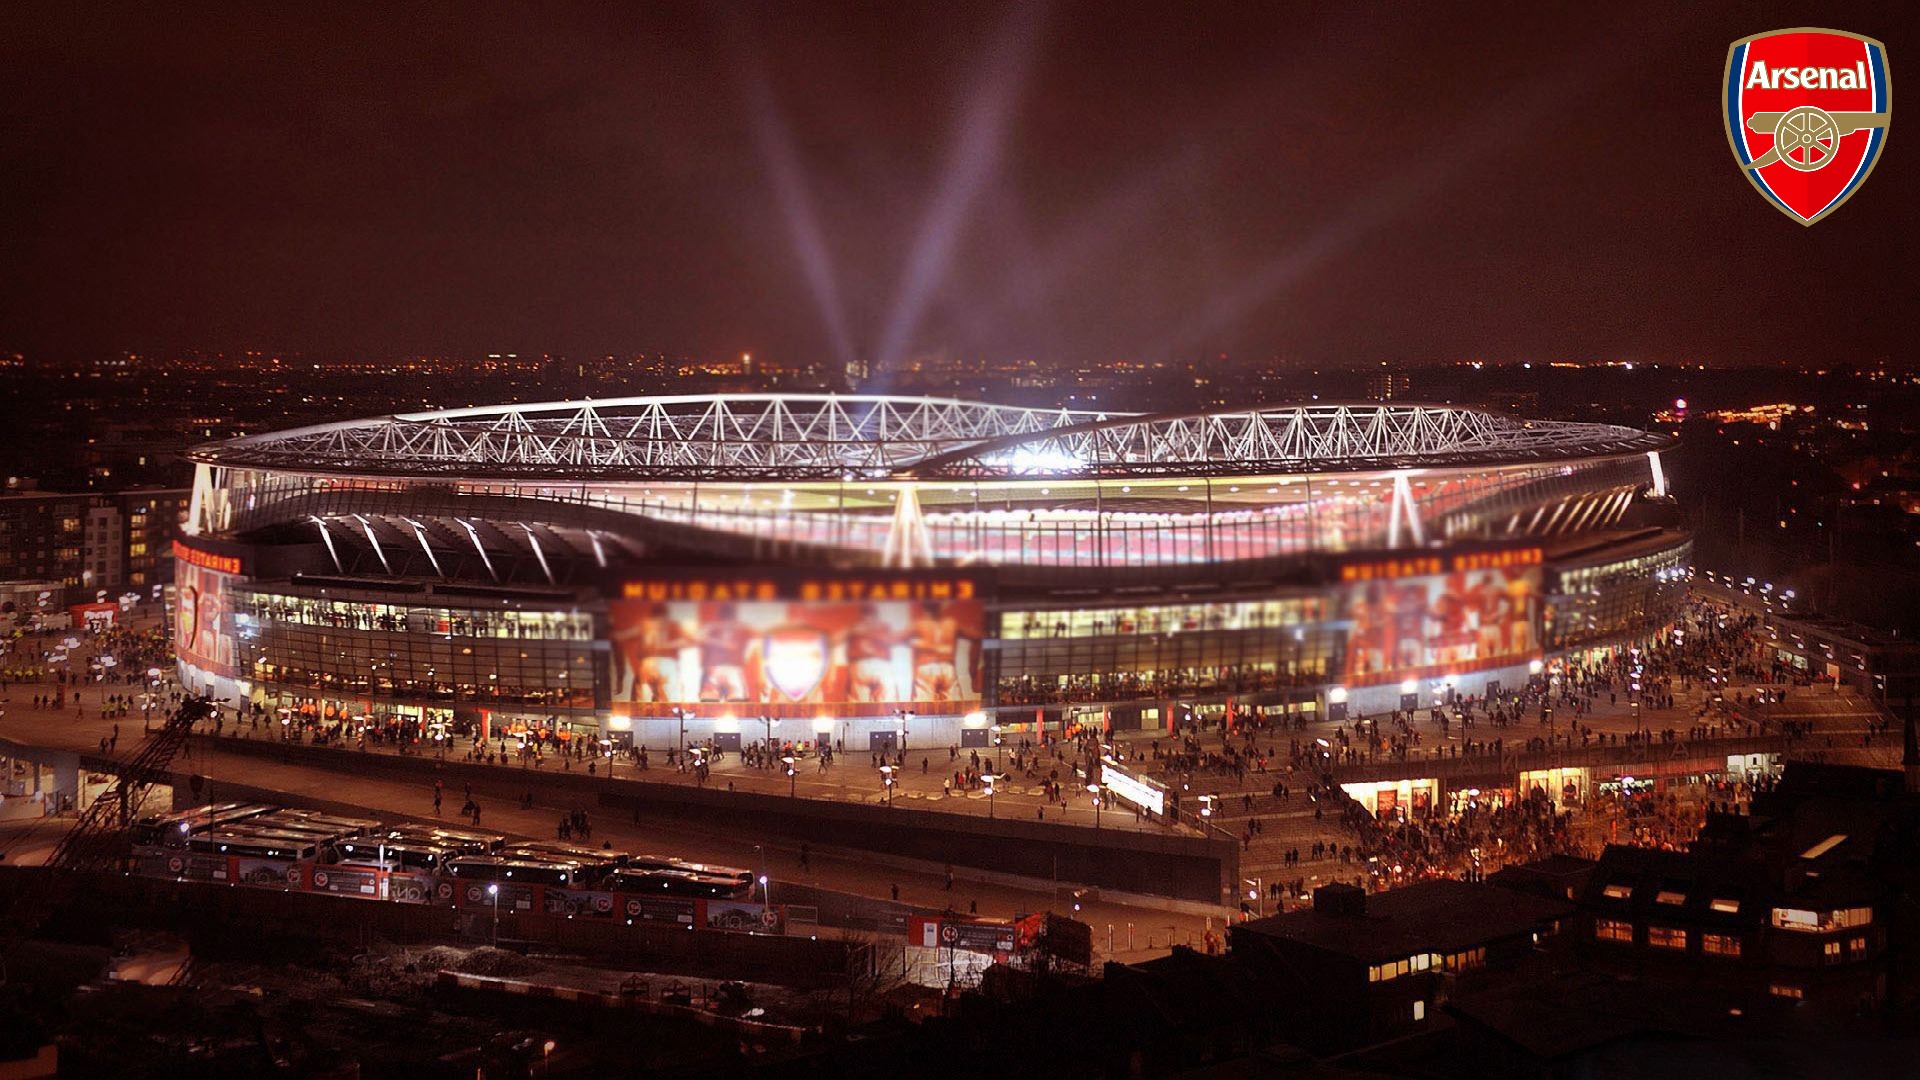 HD Arsenal Stadium Backgrounds with resolution 1920x1080 pixel. You can make this wallpaper for your Mac or Windows Desktop Background, iPhone, Android or Tablet and another Smartphone device